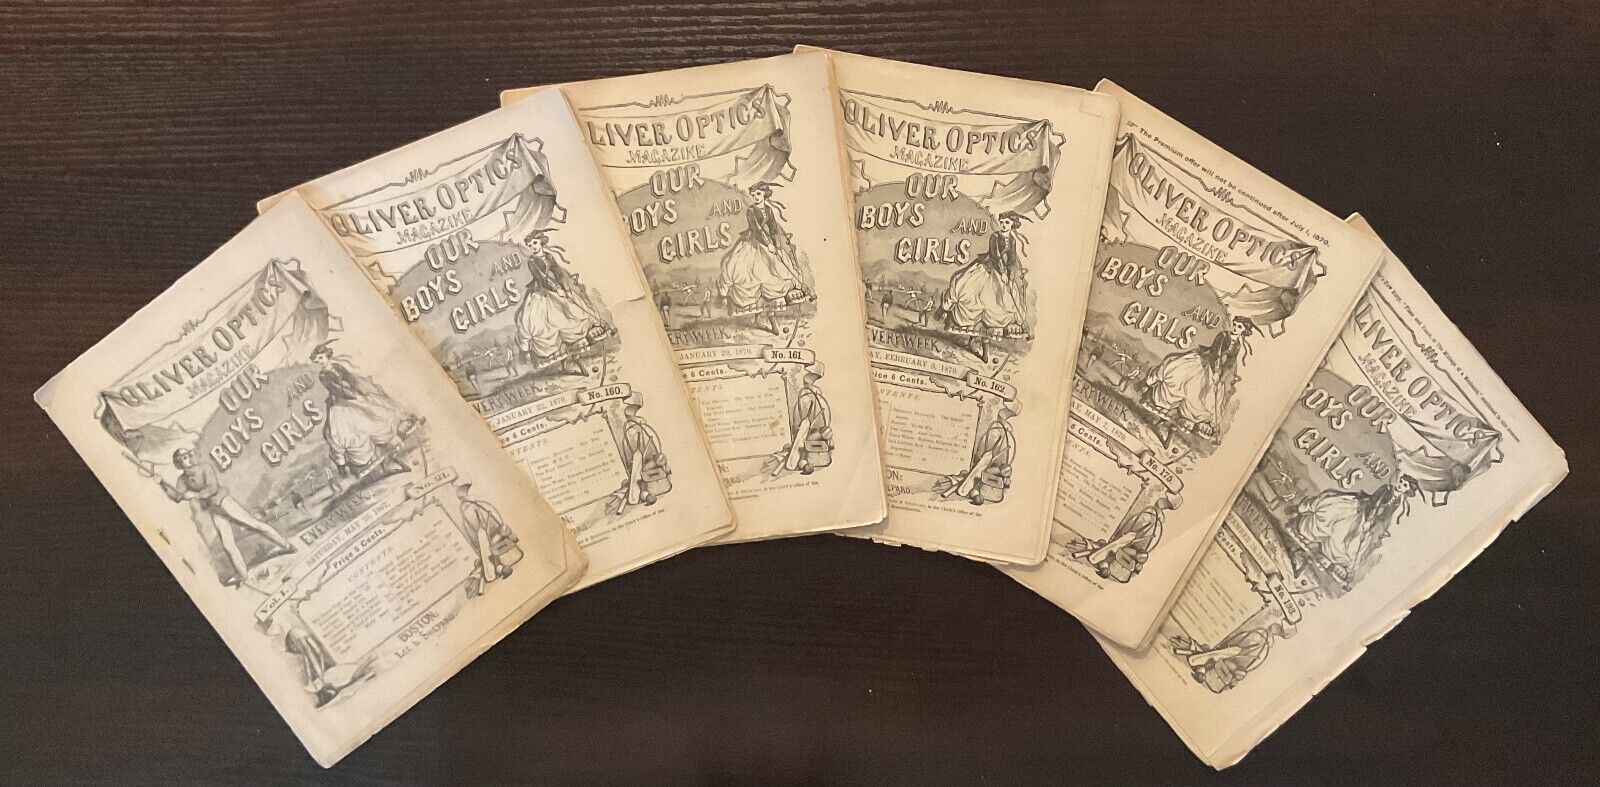 6 Oliver Optics Magazines - Our Boys and Girls Every Week - 1867 (1), 1870 (5)